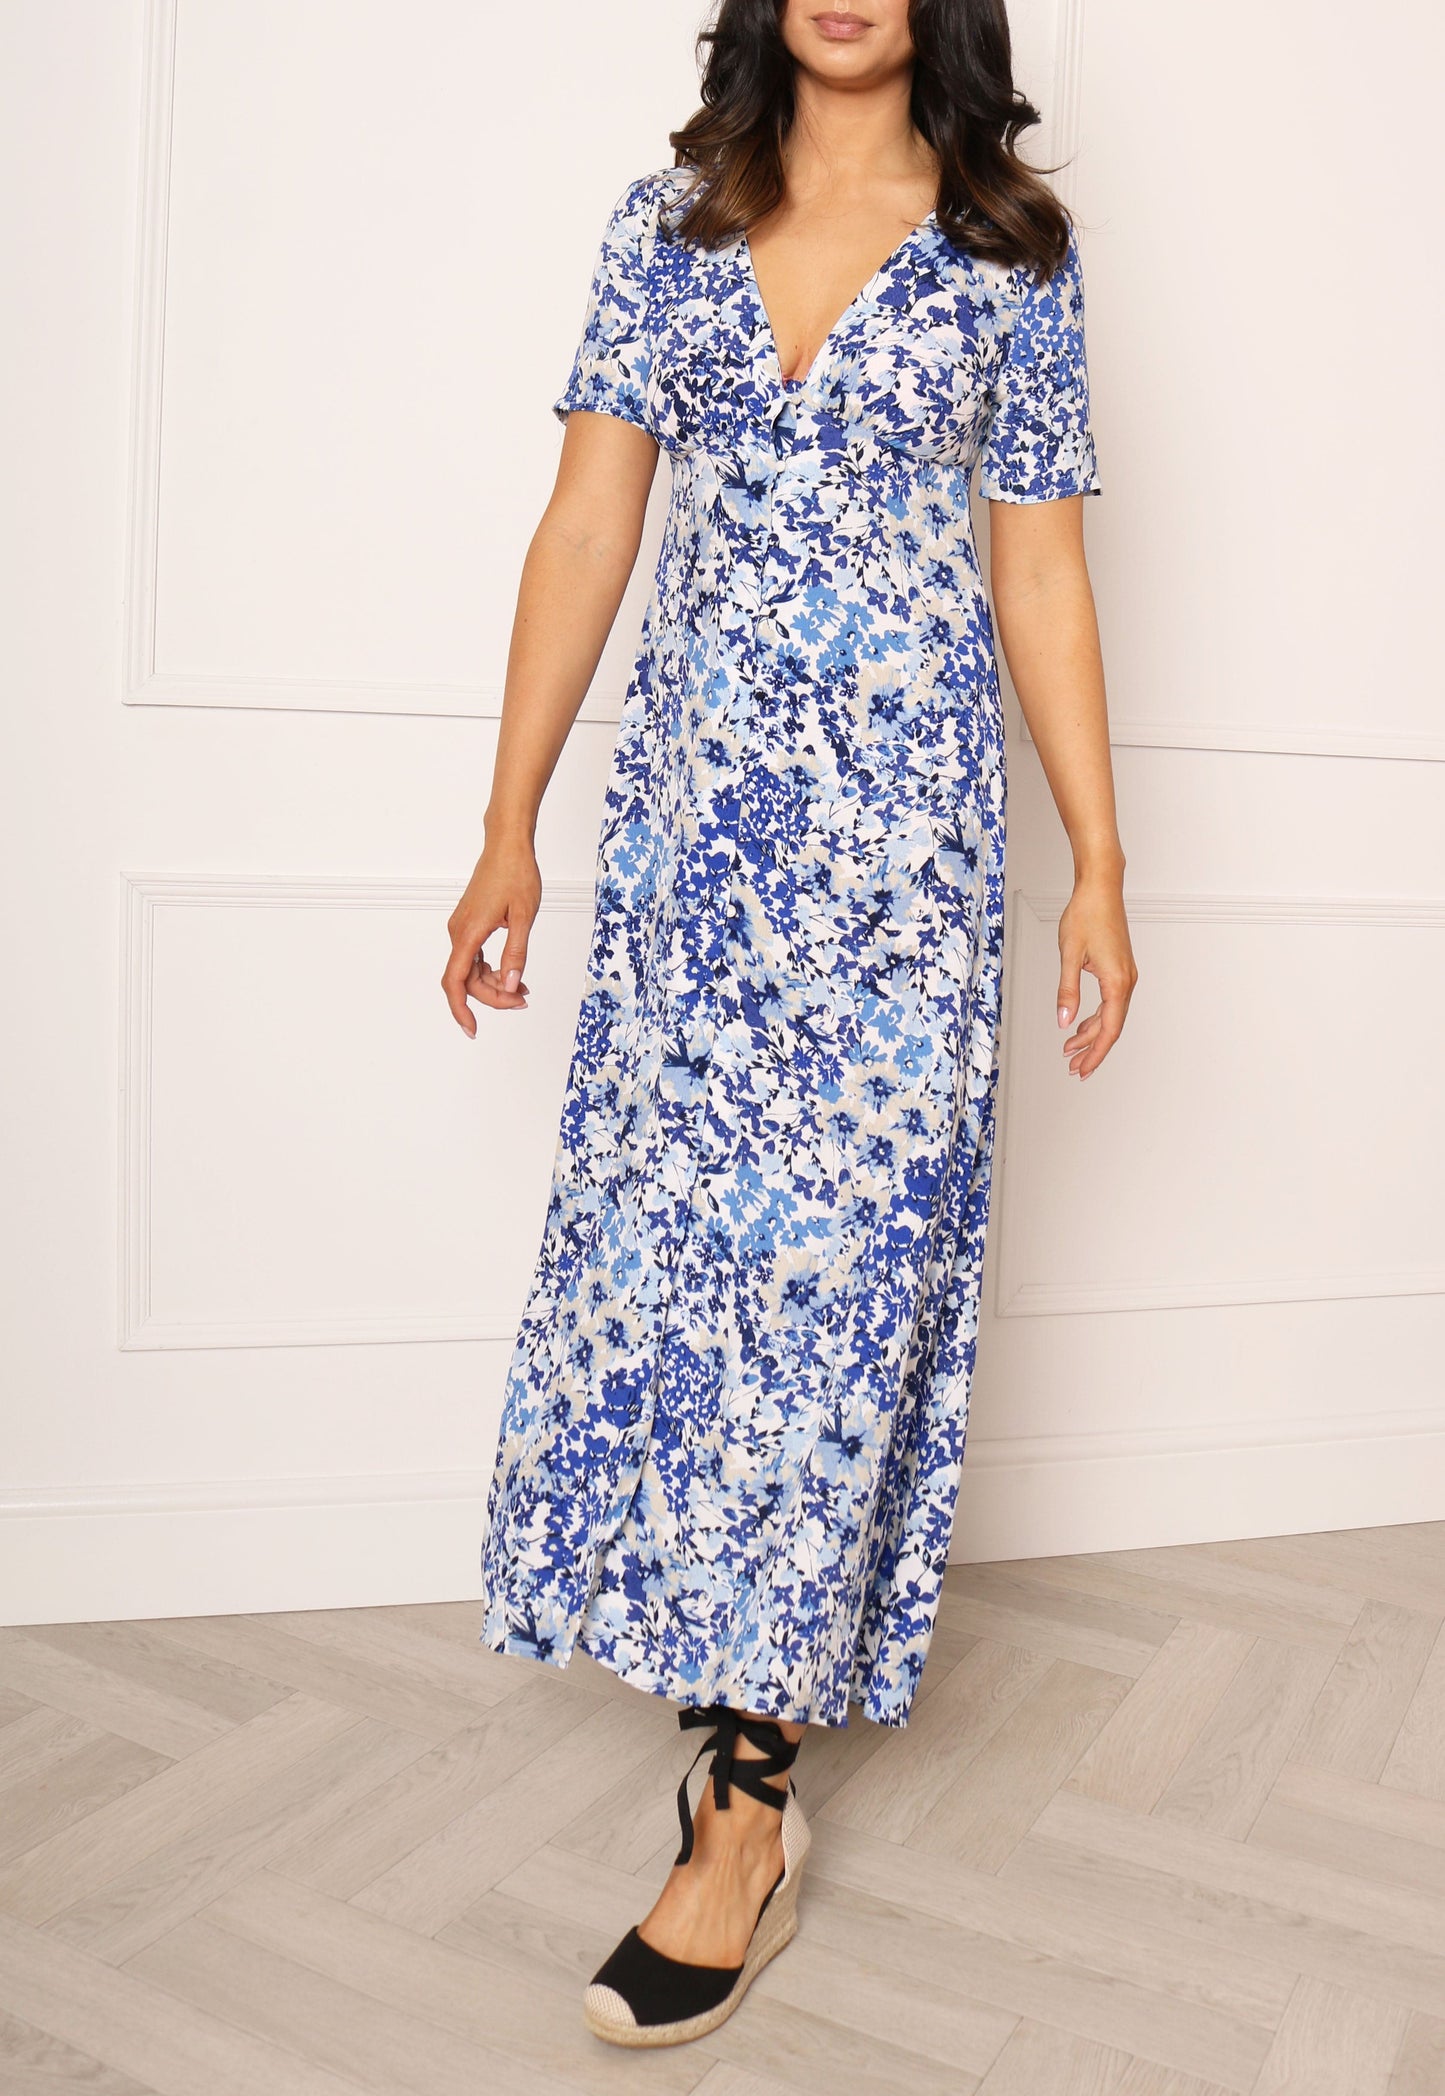 ONLY Enola Floral Print Maxi Tea Dress with Button Fastening in Blue & White - concretebartops